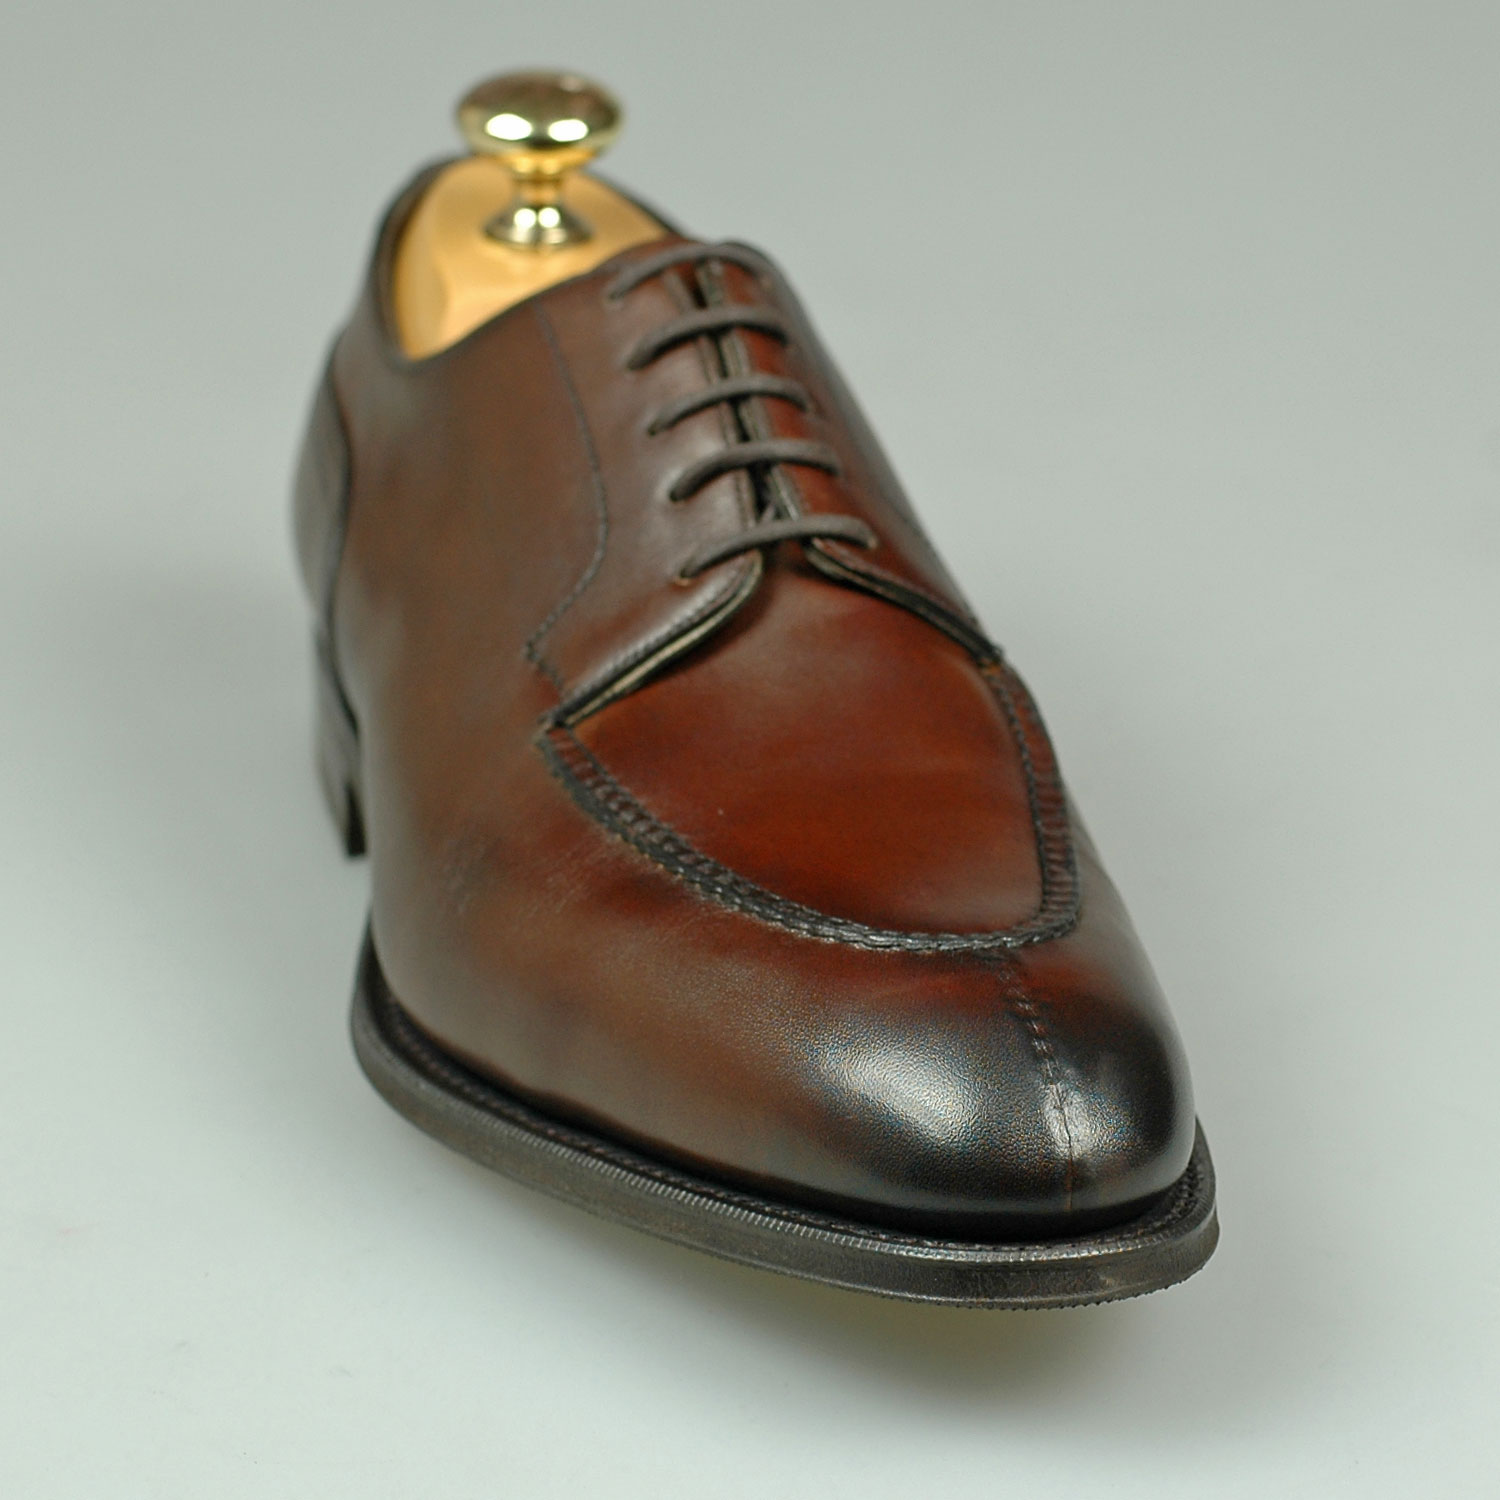 Shop Edward Green Dover online at Shoes  Shirts